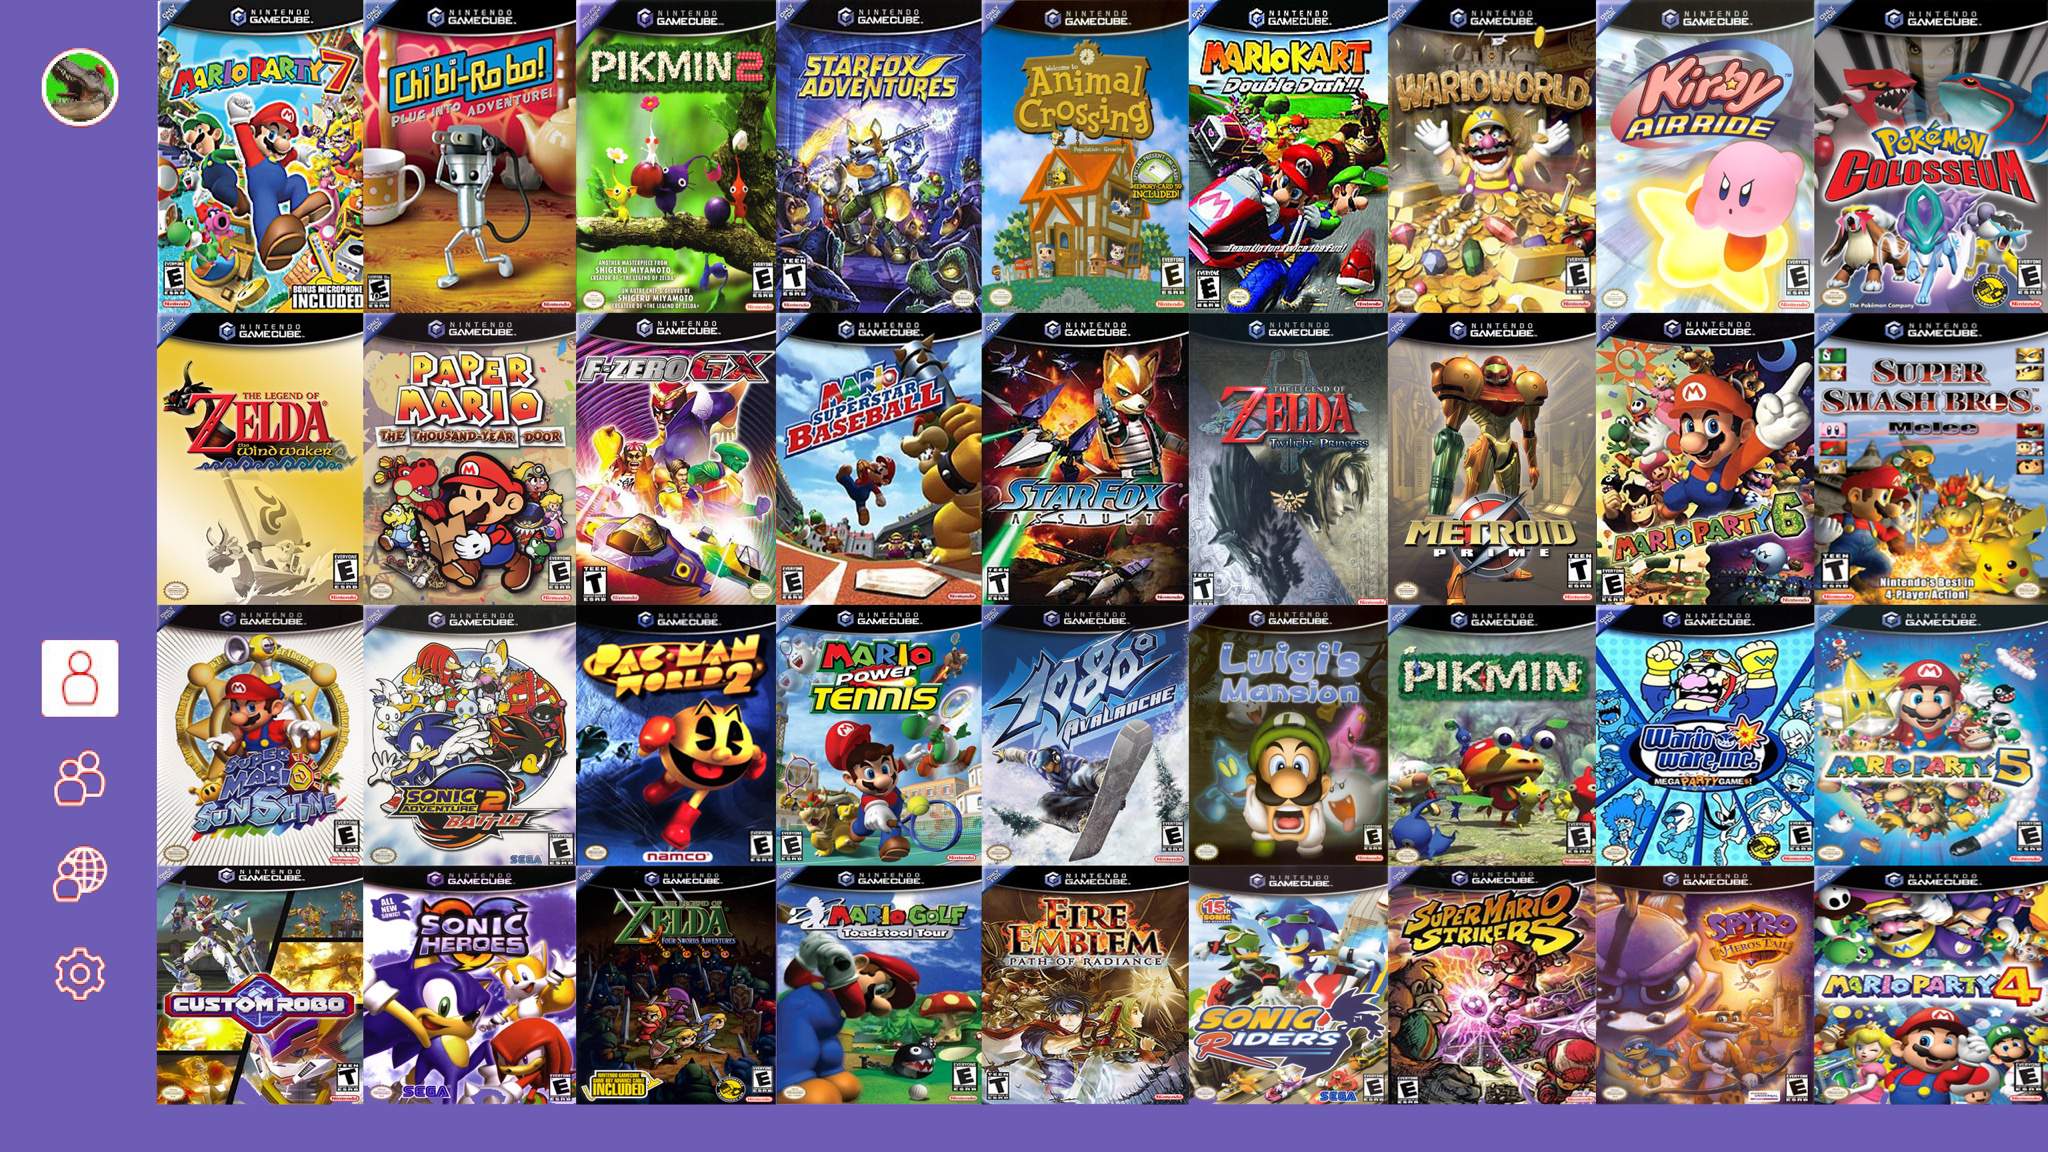 gamecube games on switch